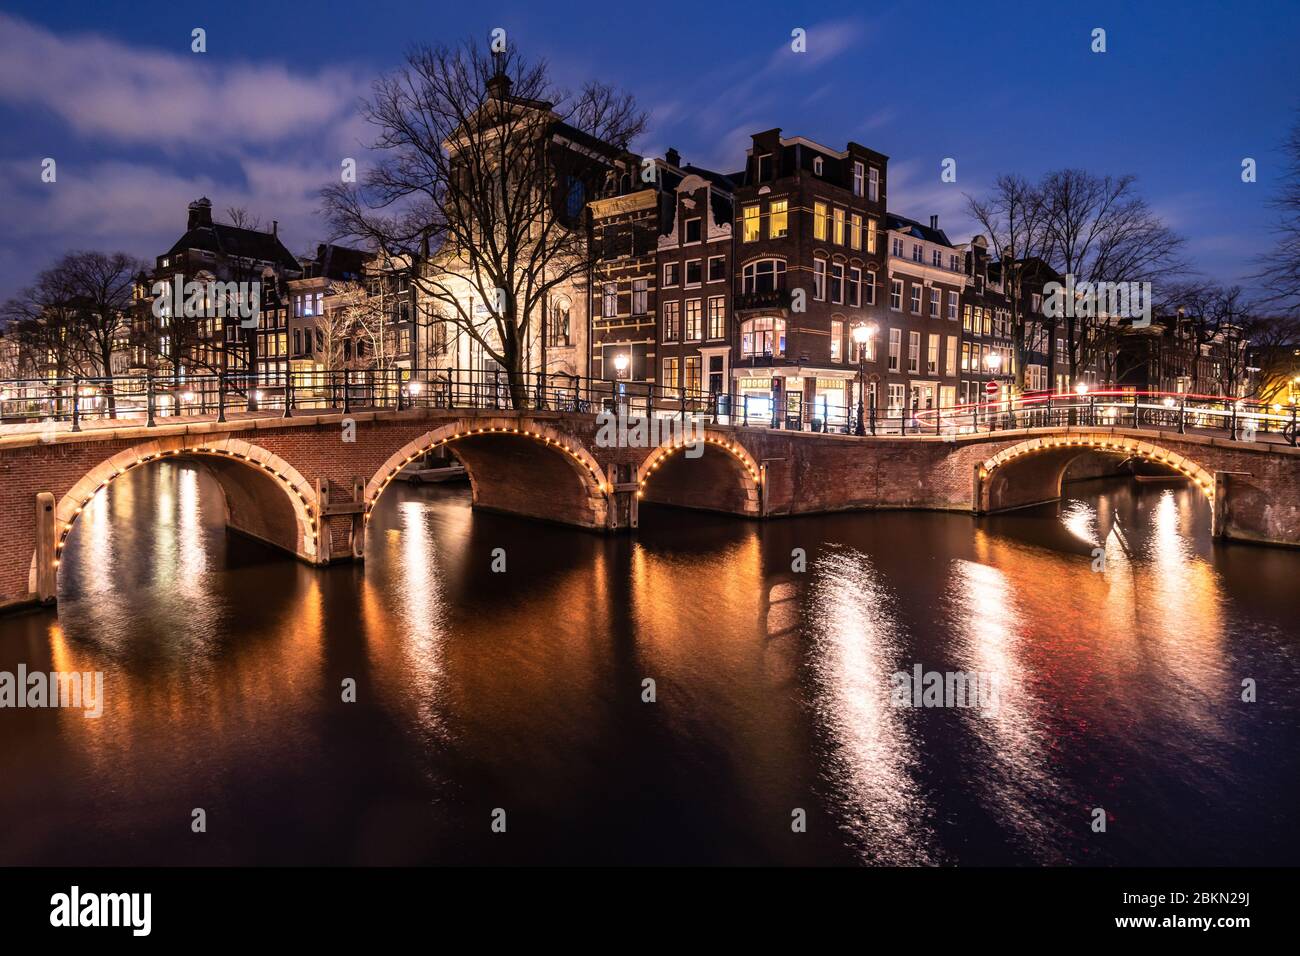 Atmospheric view of the famous Amsterdam canals and traditional Dutch style houses in the Netherlands largest city at night. Shot as a long exposure t Stock Photo